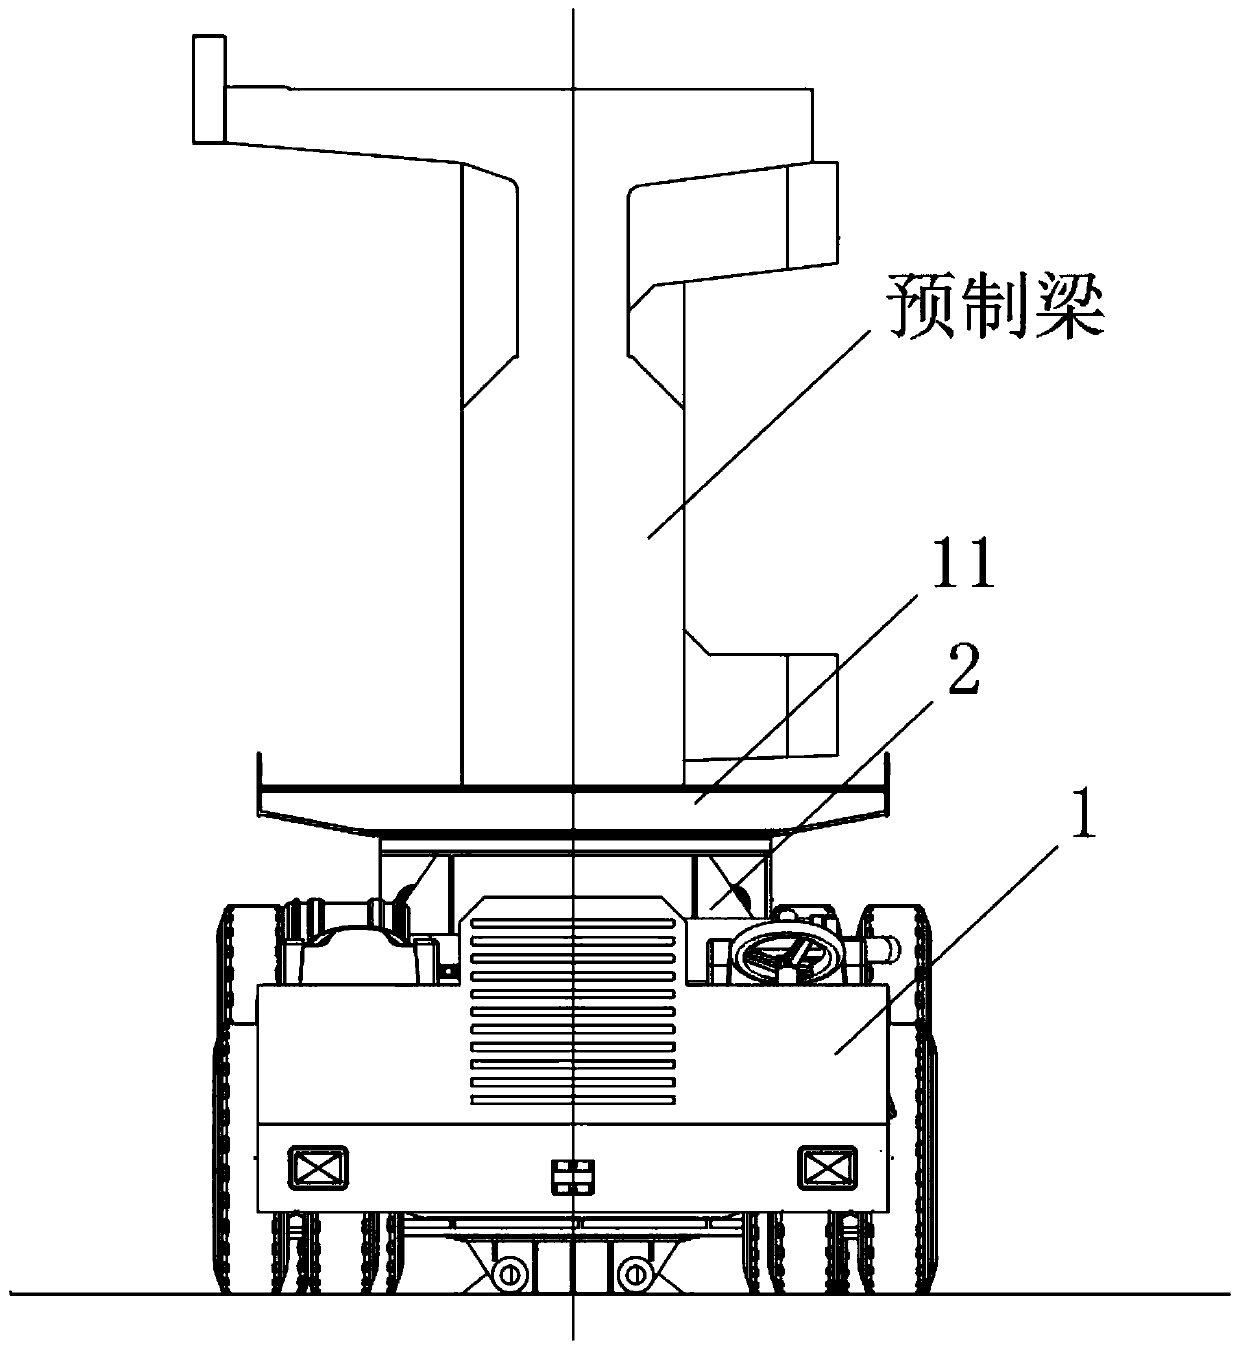 Horizontal posture adjusting mechanism of girder transporting vehicle when girders are transported on curved section transverse slope